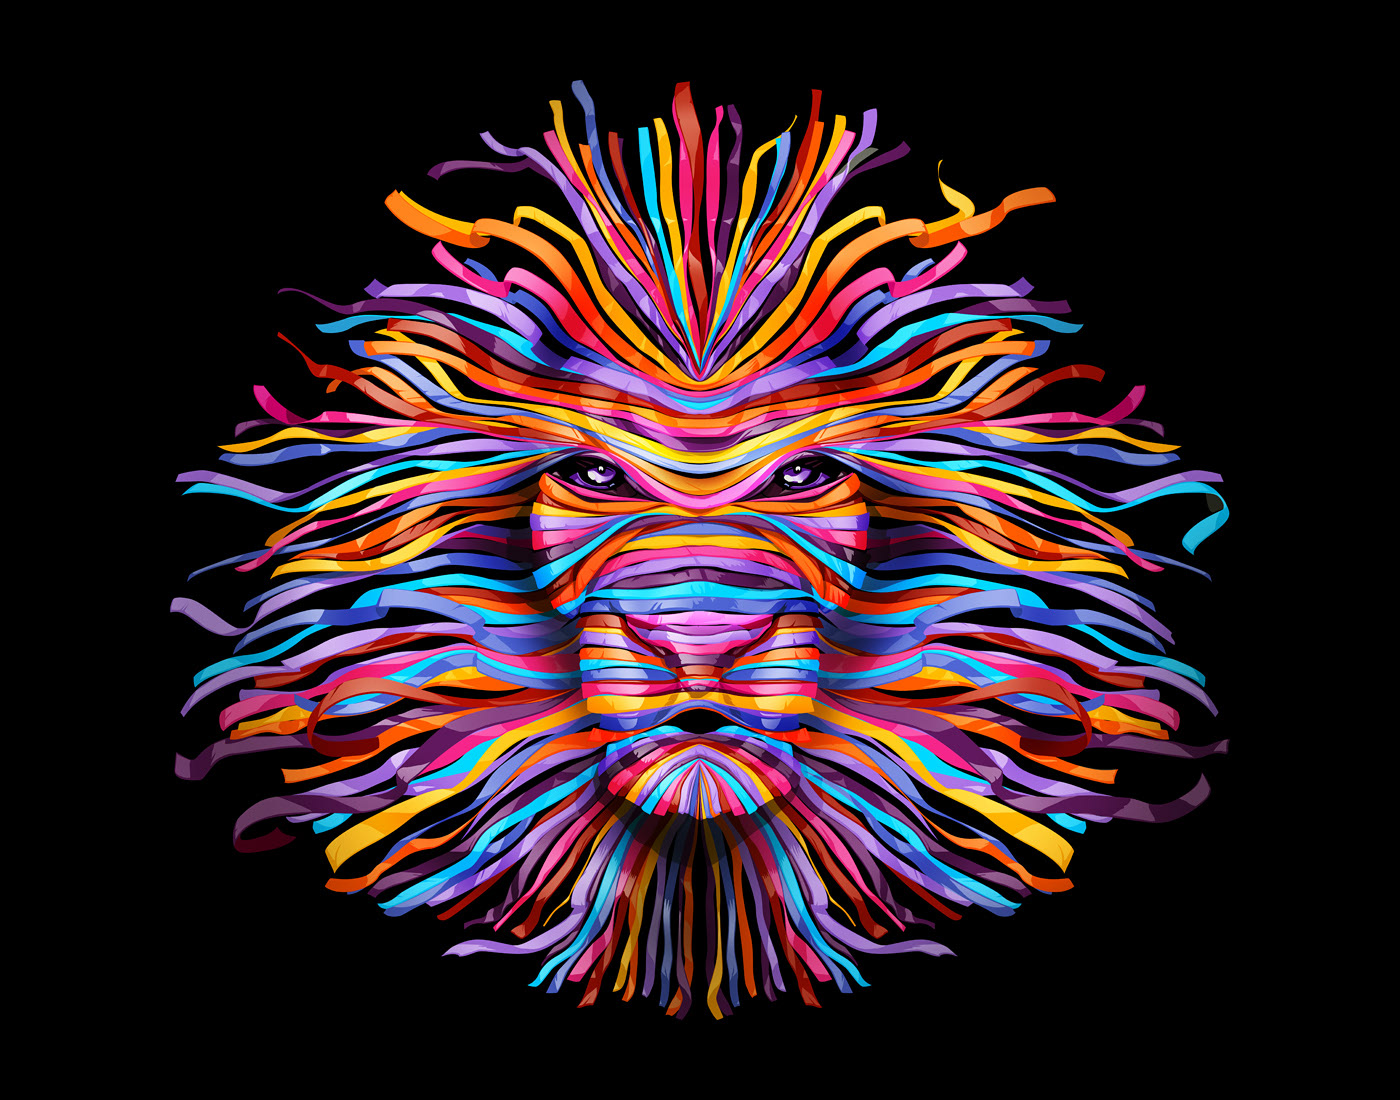 Adobe at 2015 Cannes Lions